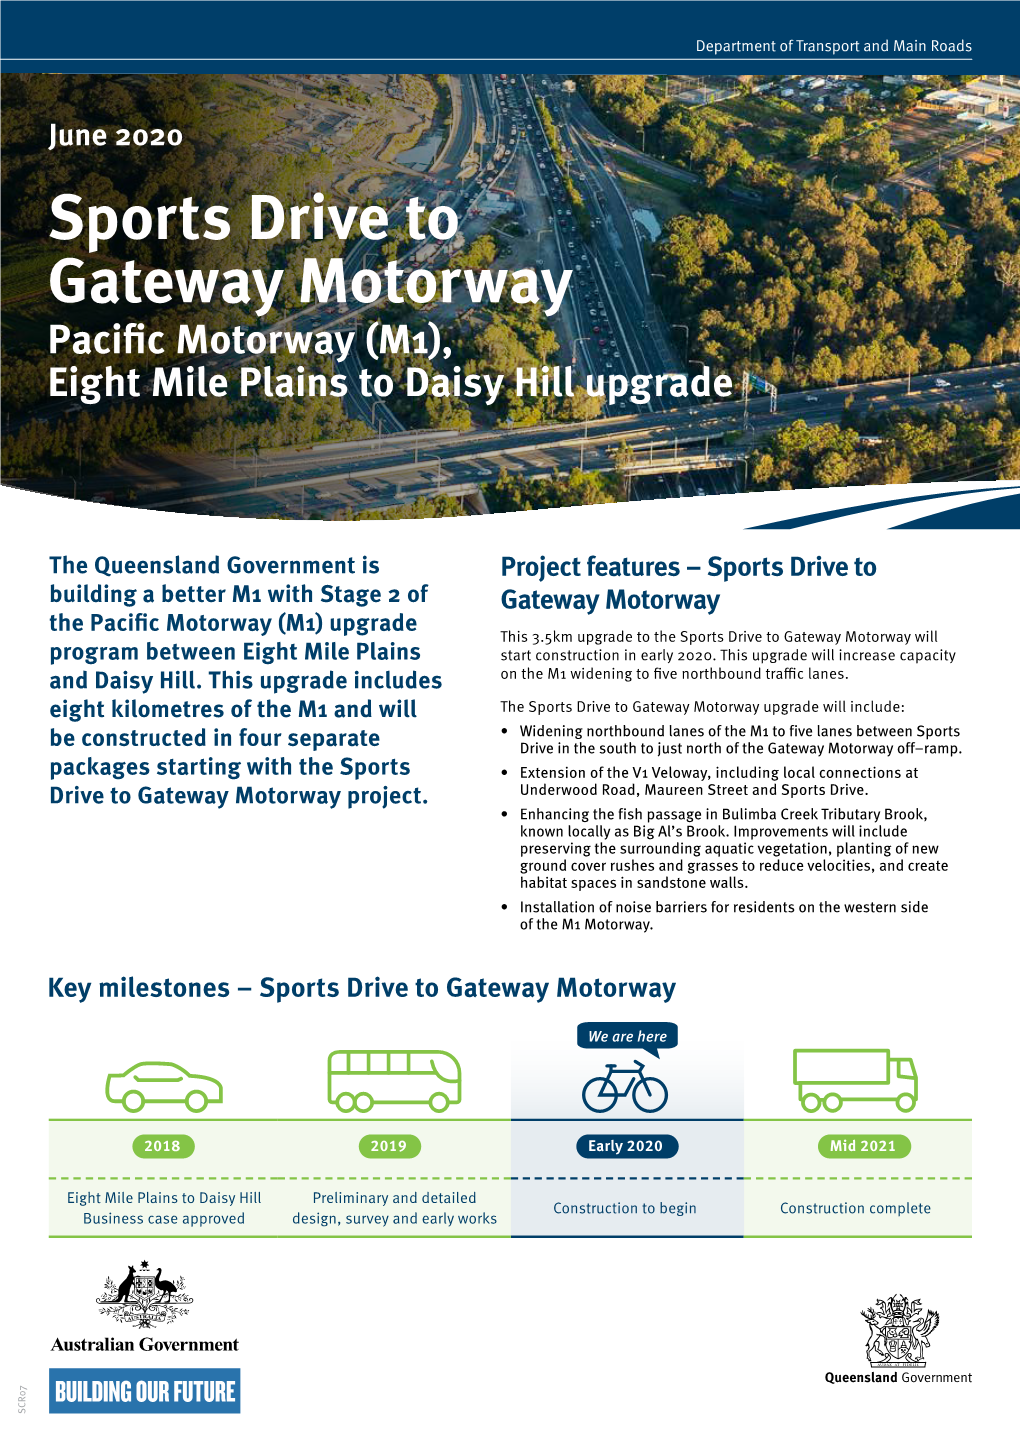 Sports Drive to Gateway Motorway the Australian and Queensland to Gateway Kilometres of the Northbound Motorway on the Western Side of the M1